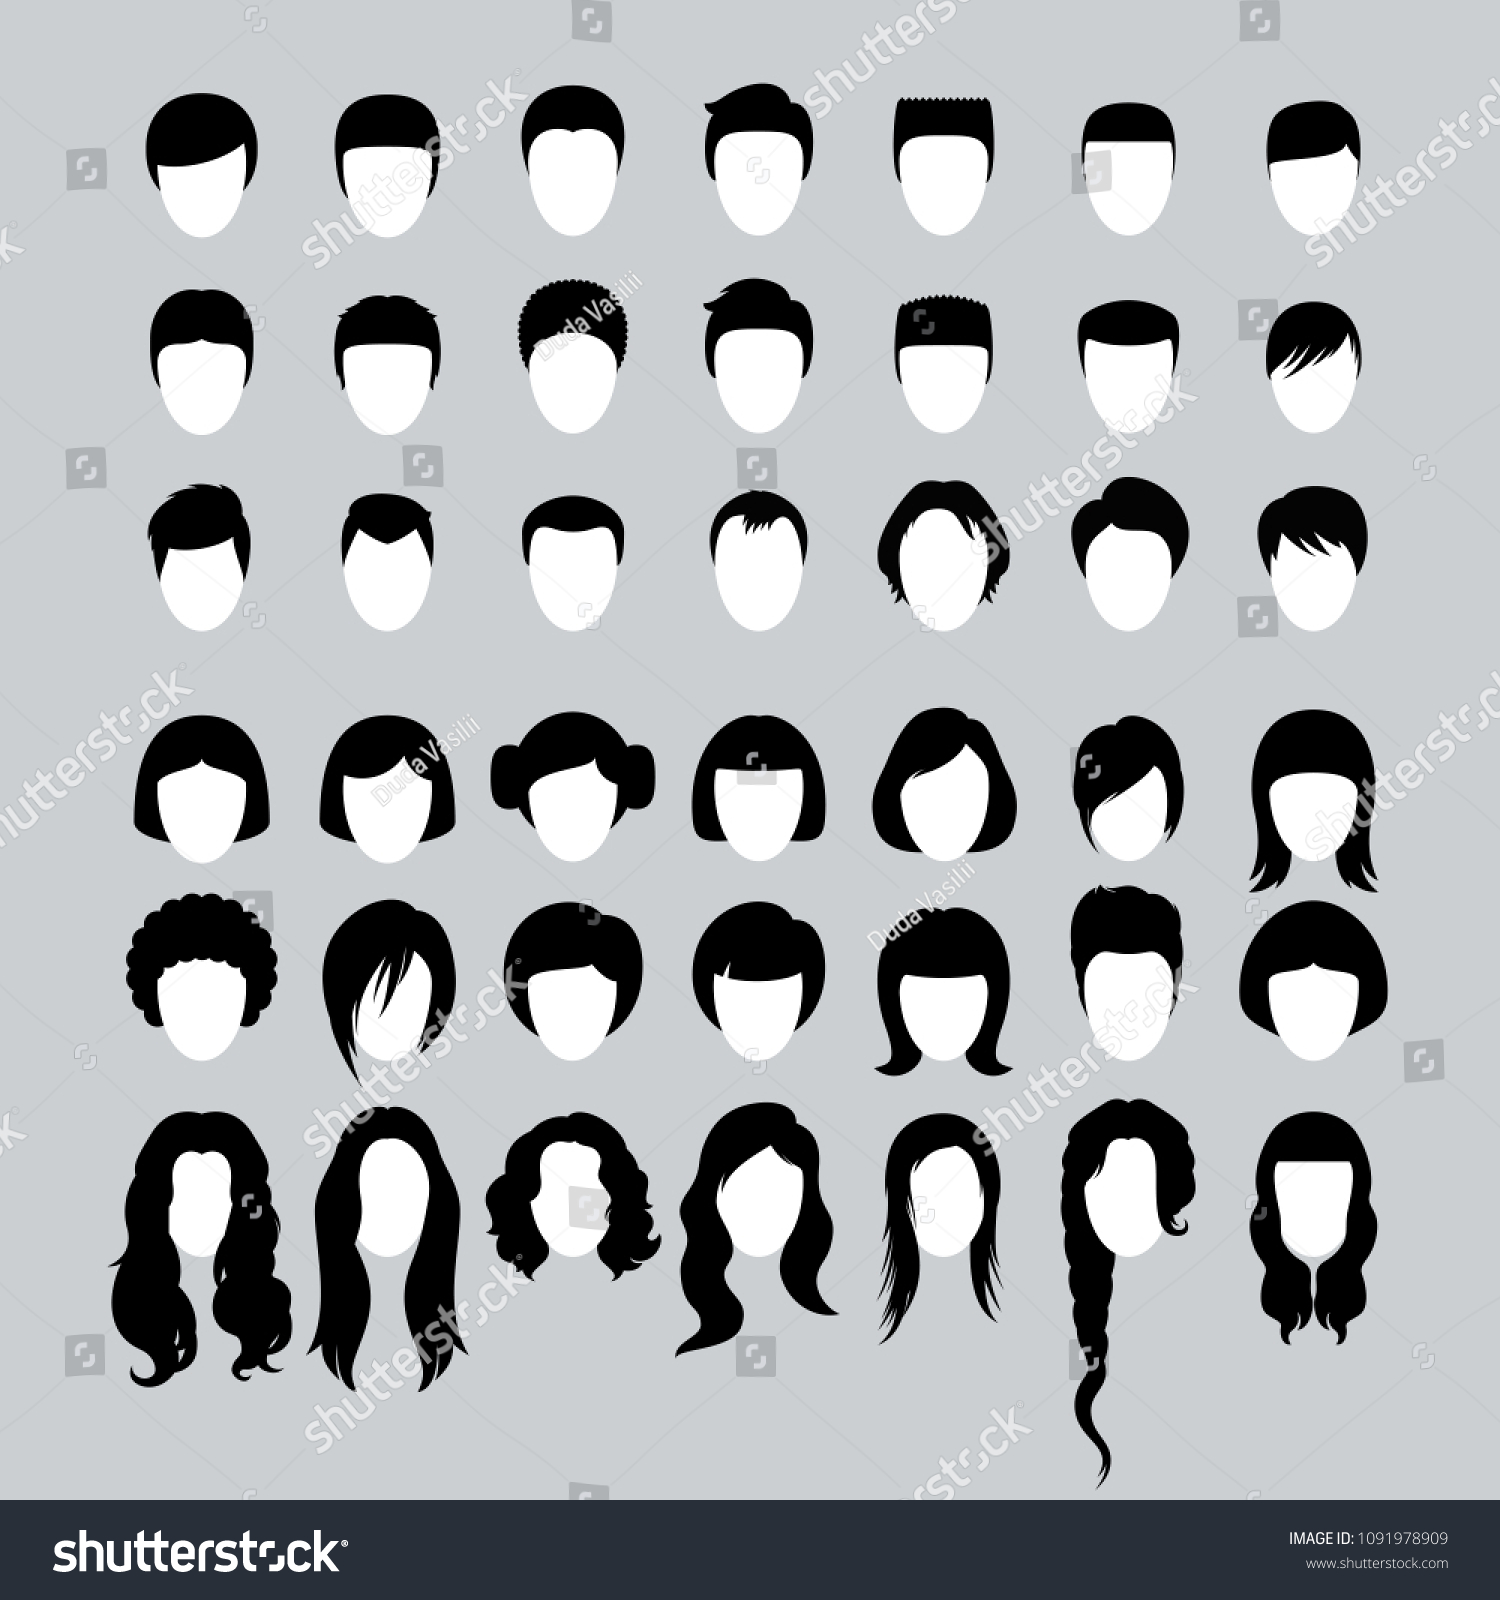 Big Set Male Female Haircuts Hairstyles Stock Vector Royalty Free 1091978909 4052